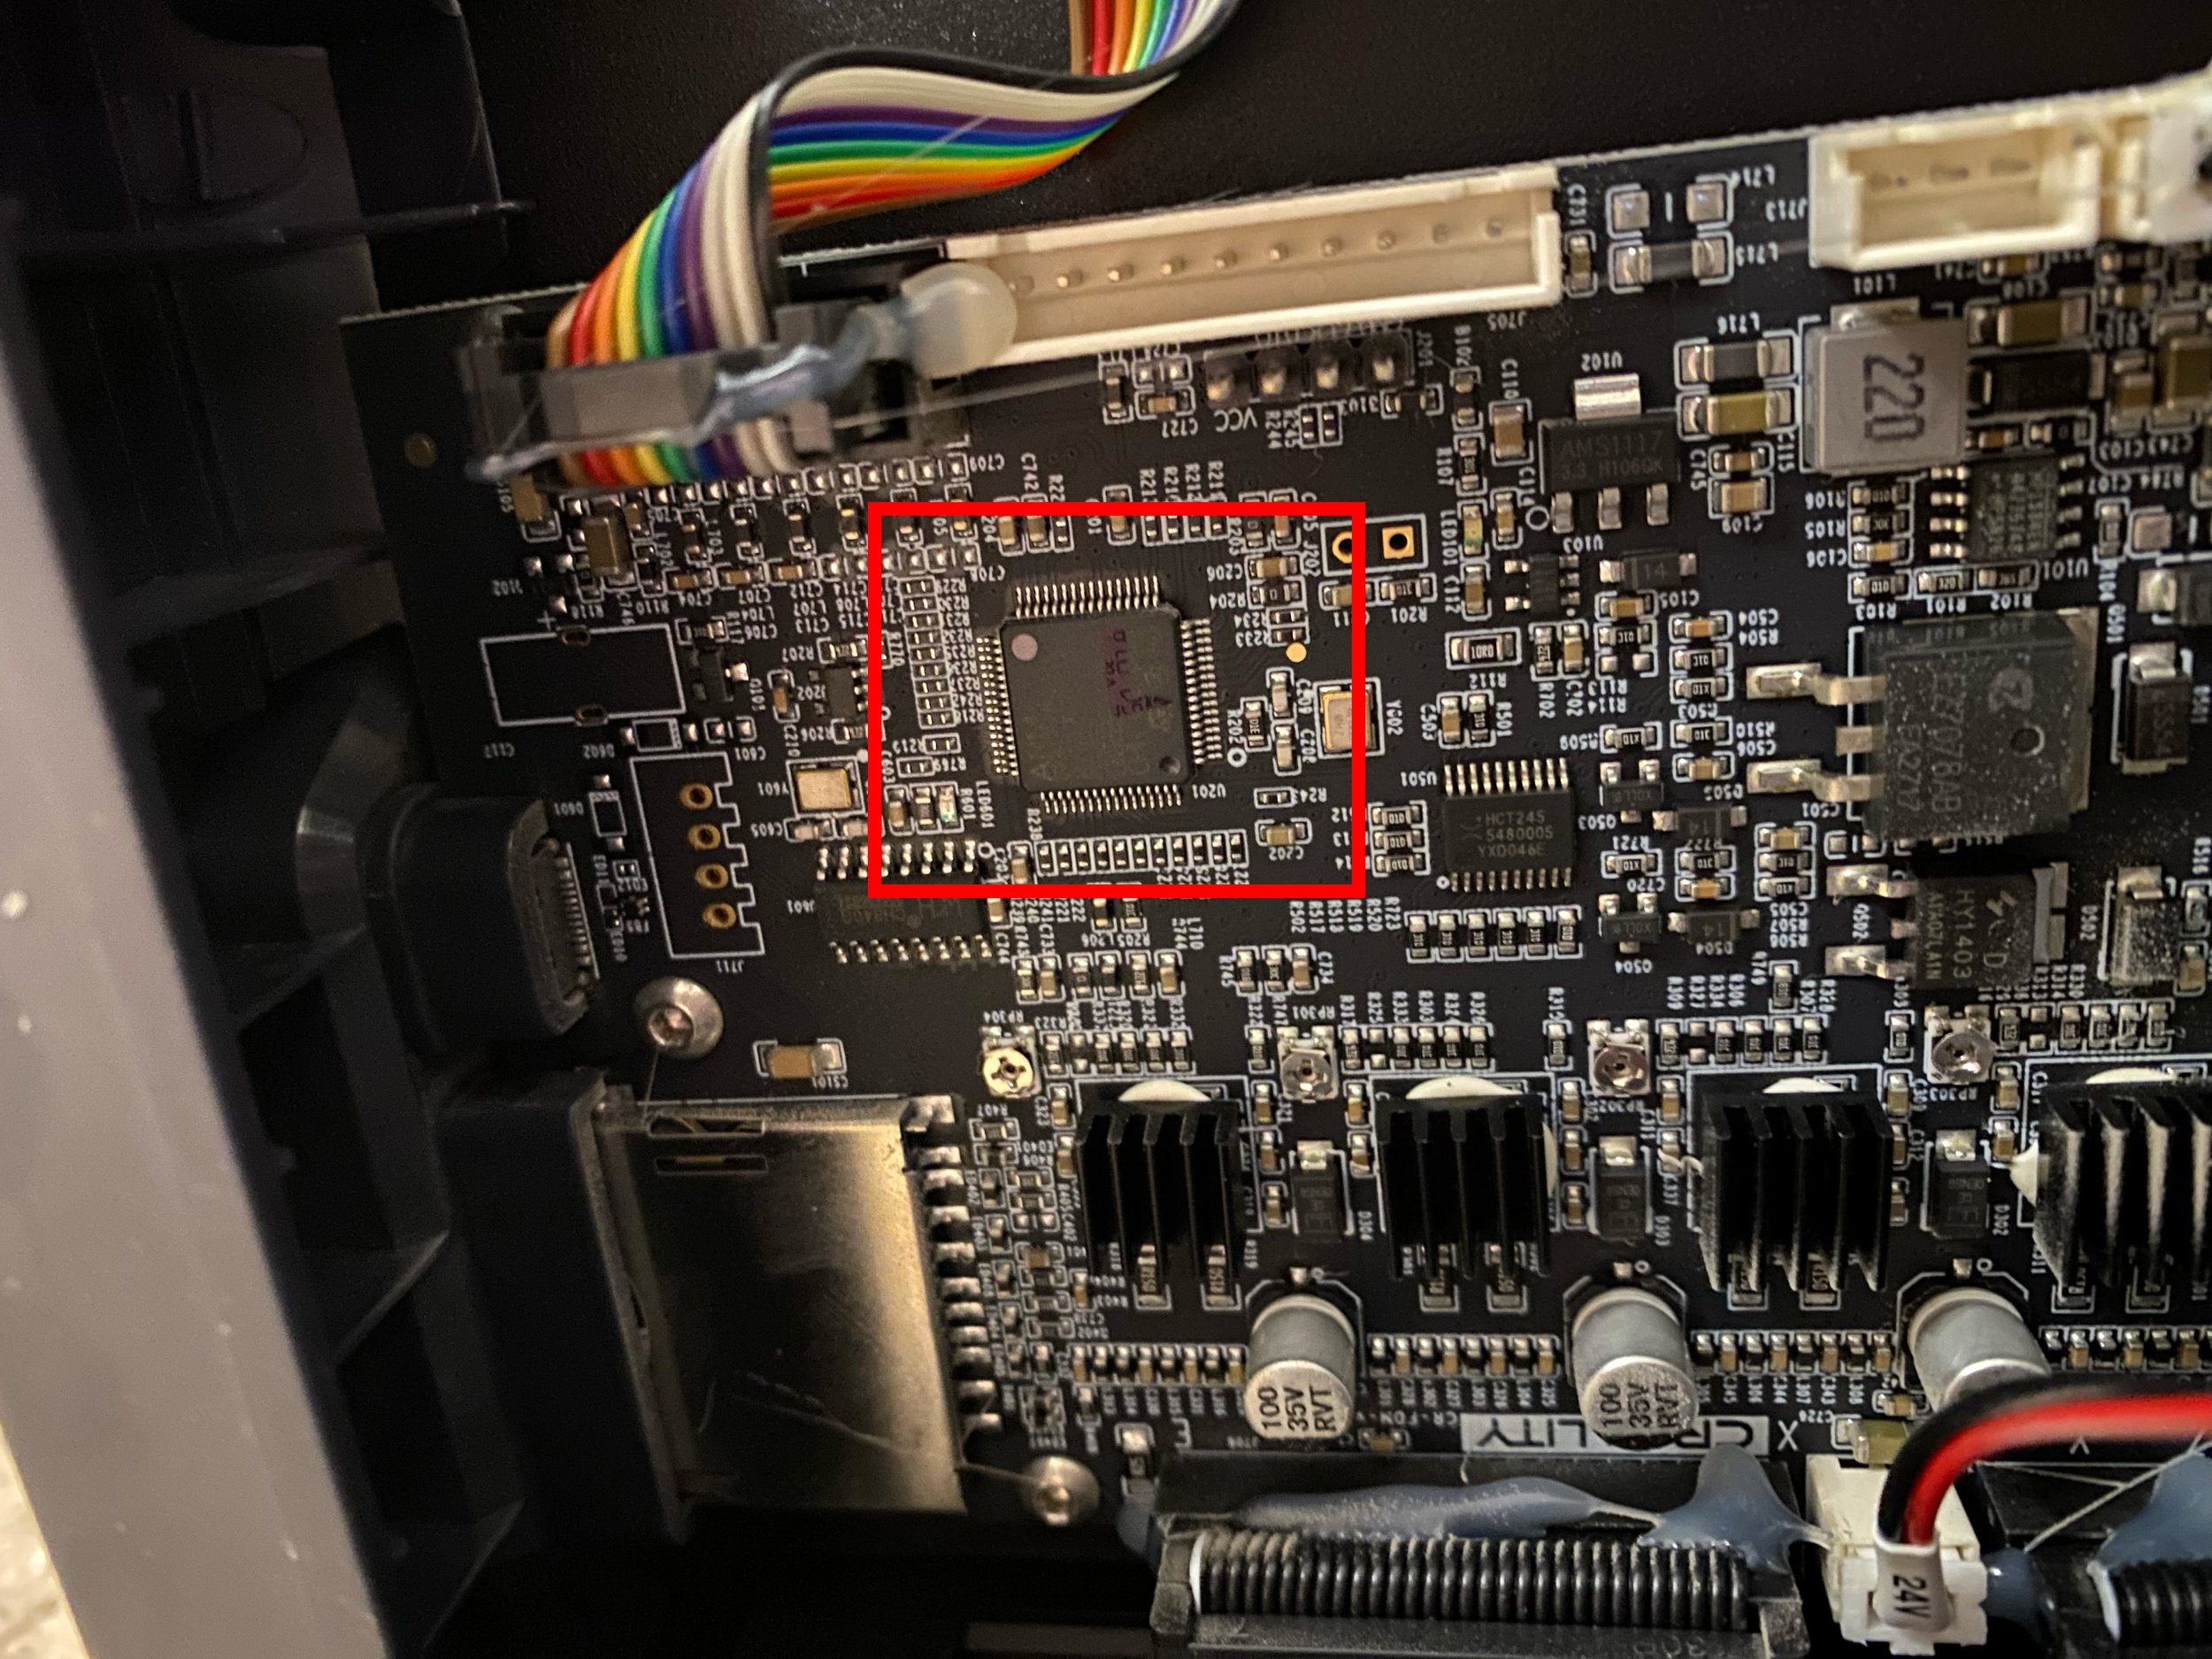 Mainboard CPU location highlighted